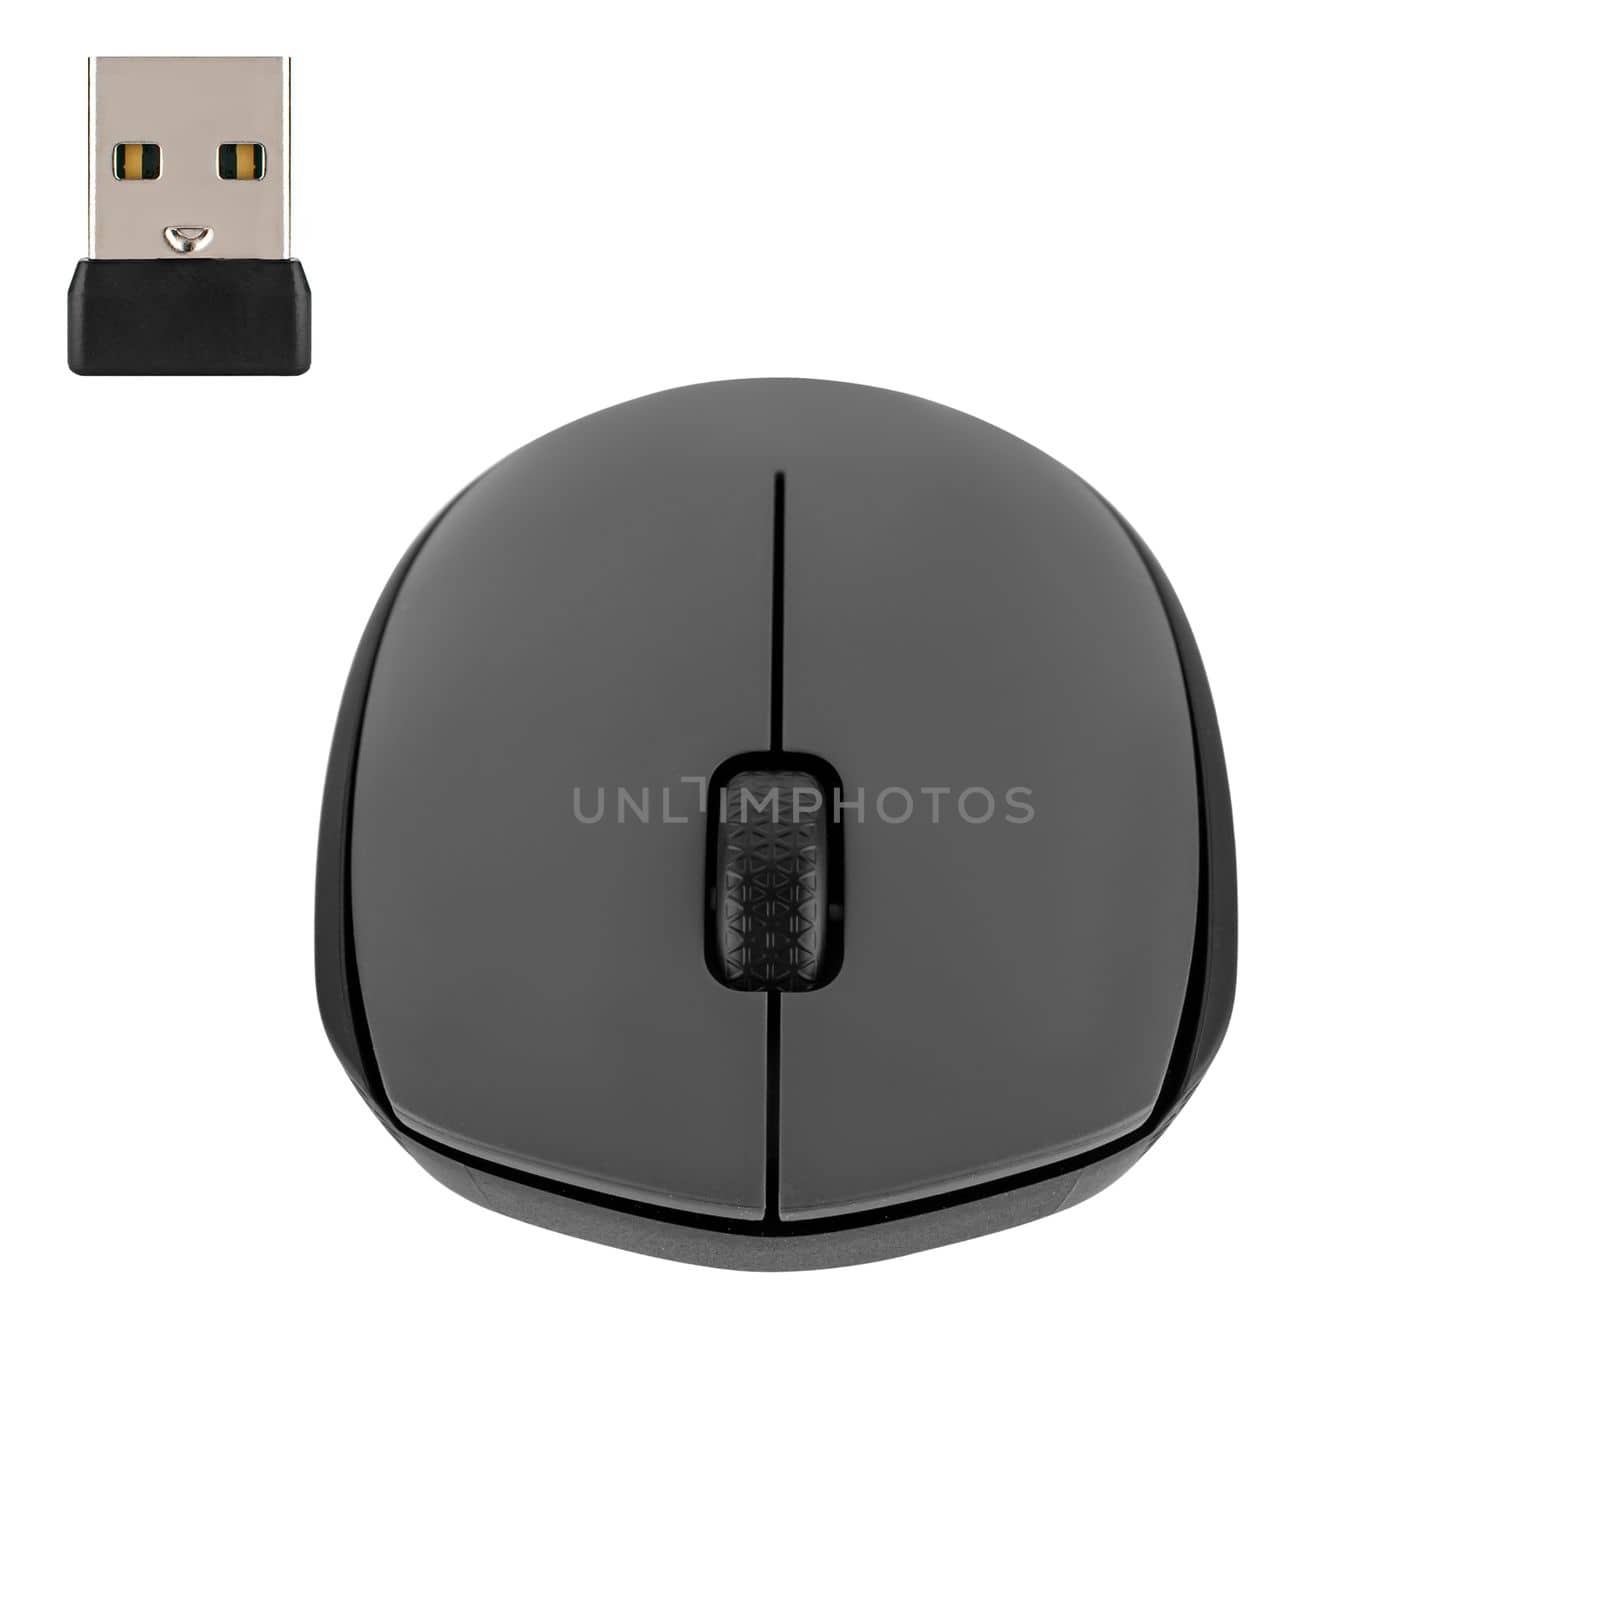 Wireless optical mouse for PC, white background in isolation